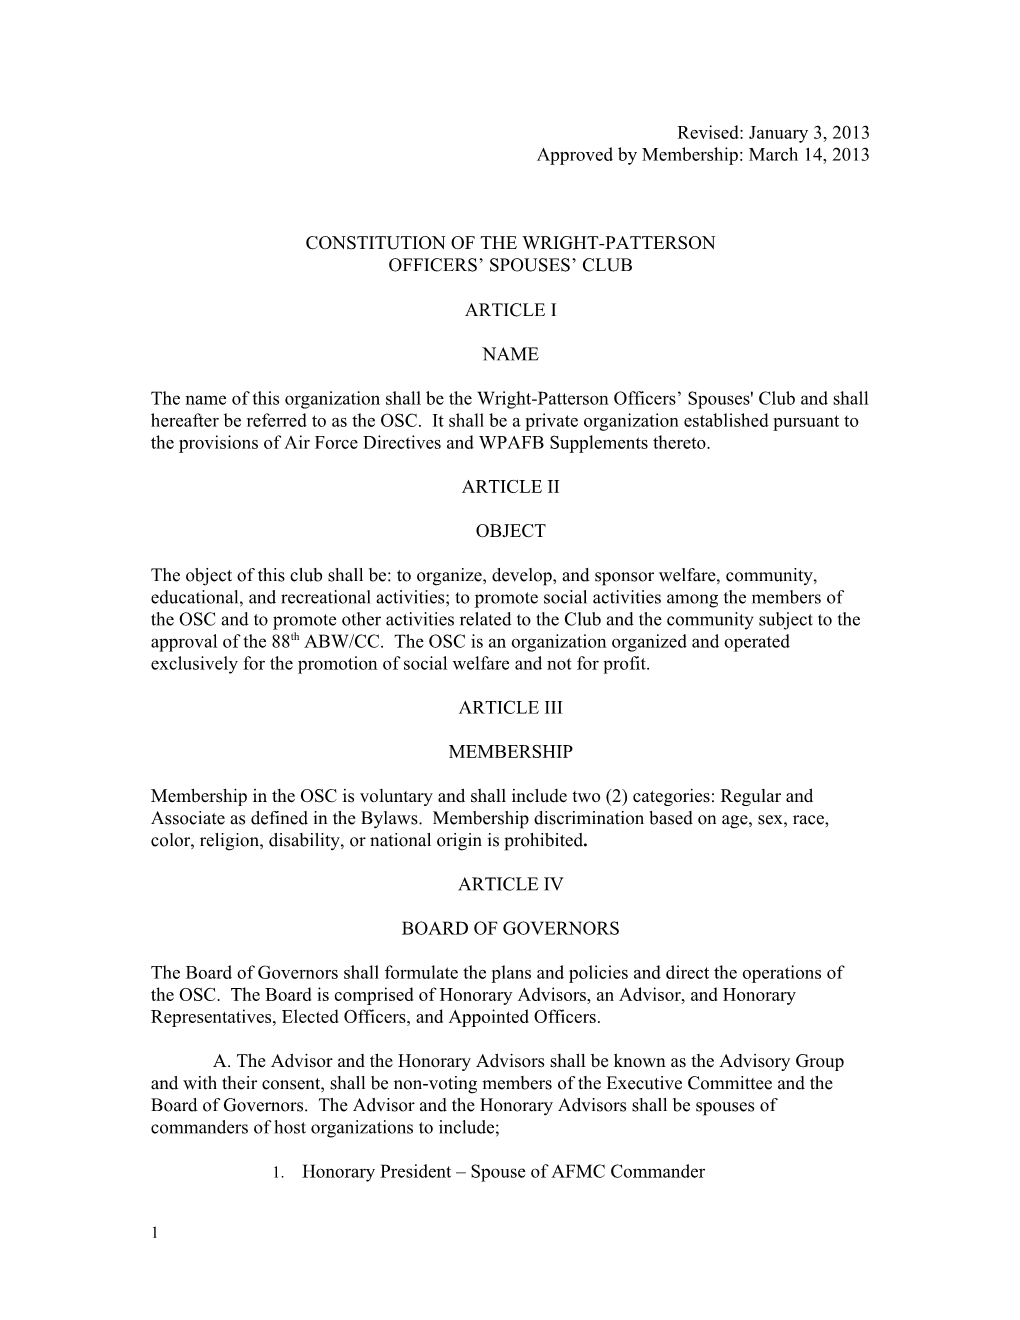 Constitution of the Wright-Patterson